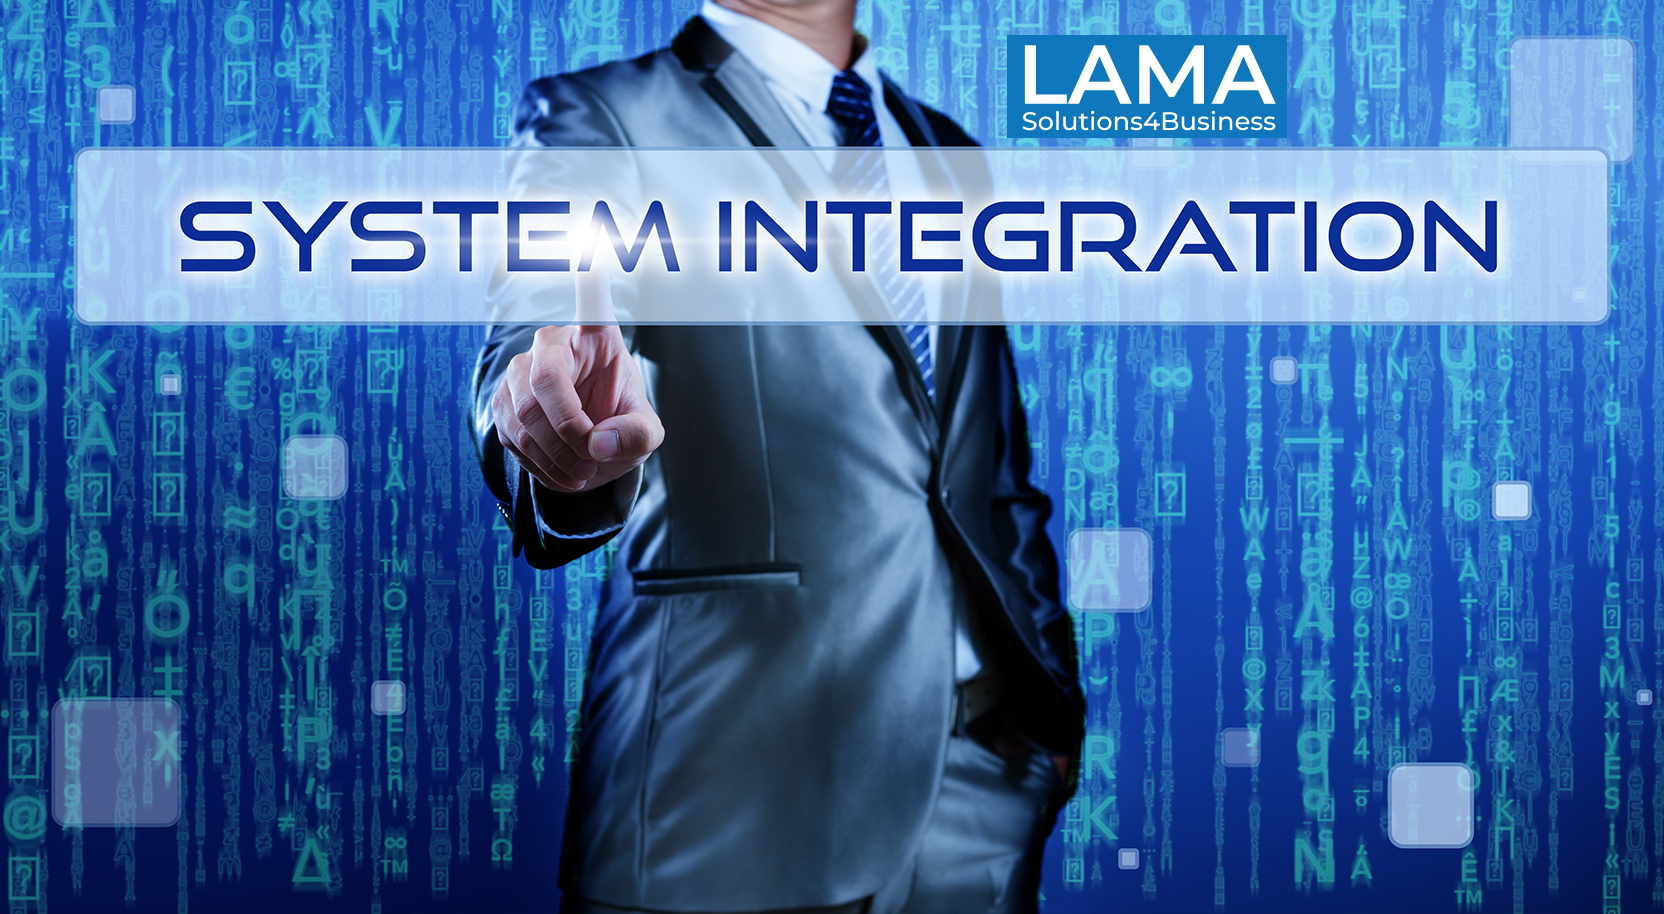 LAMA - Solutions4Business